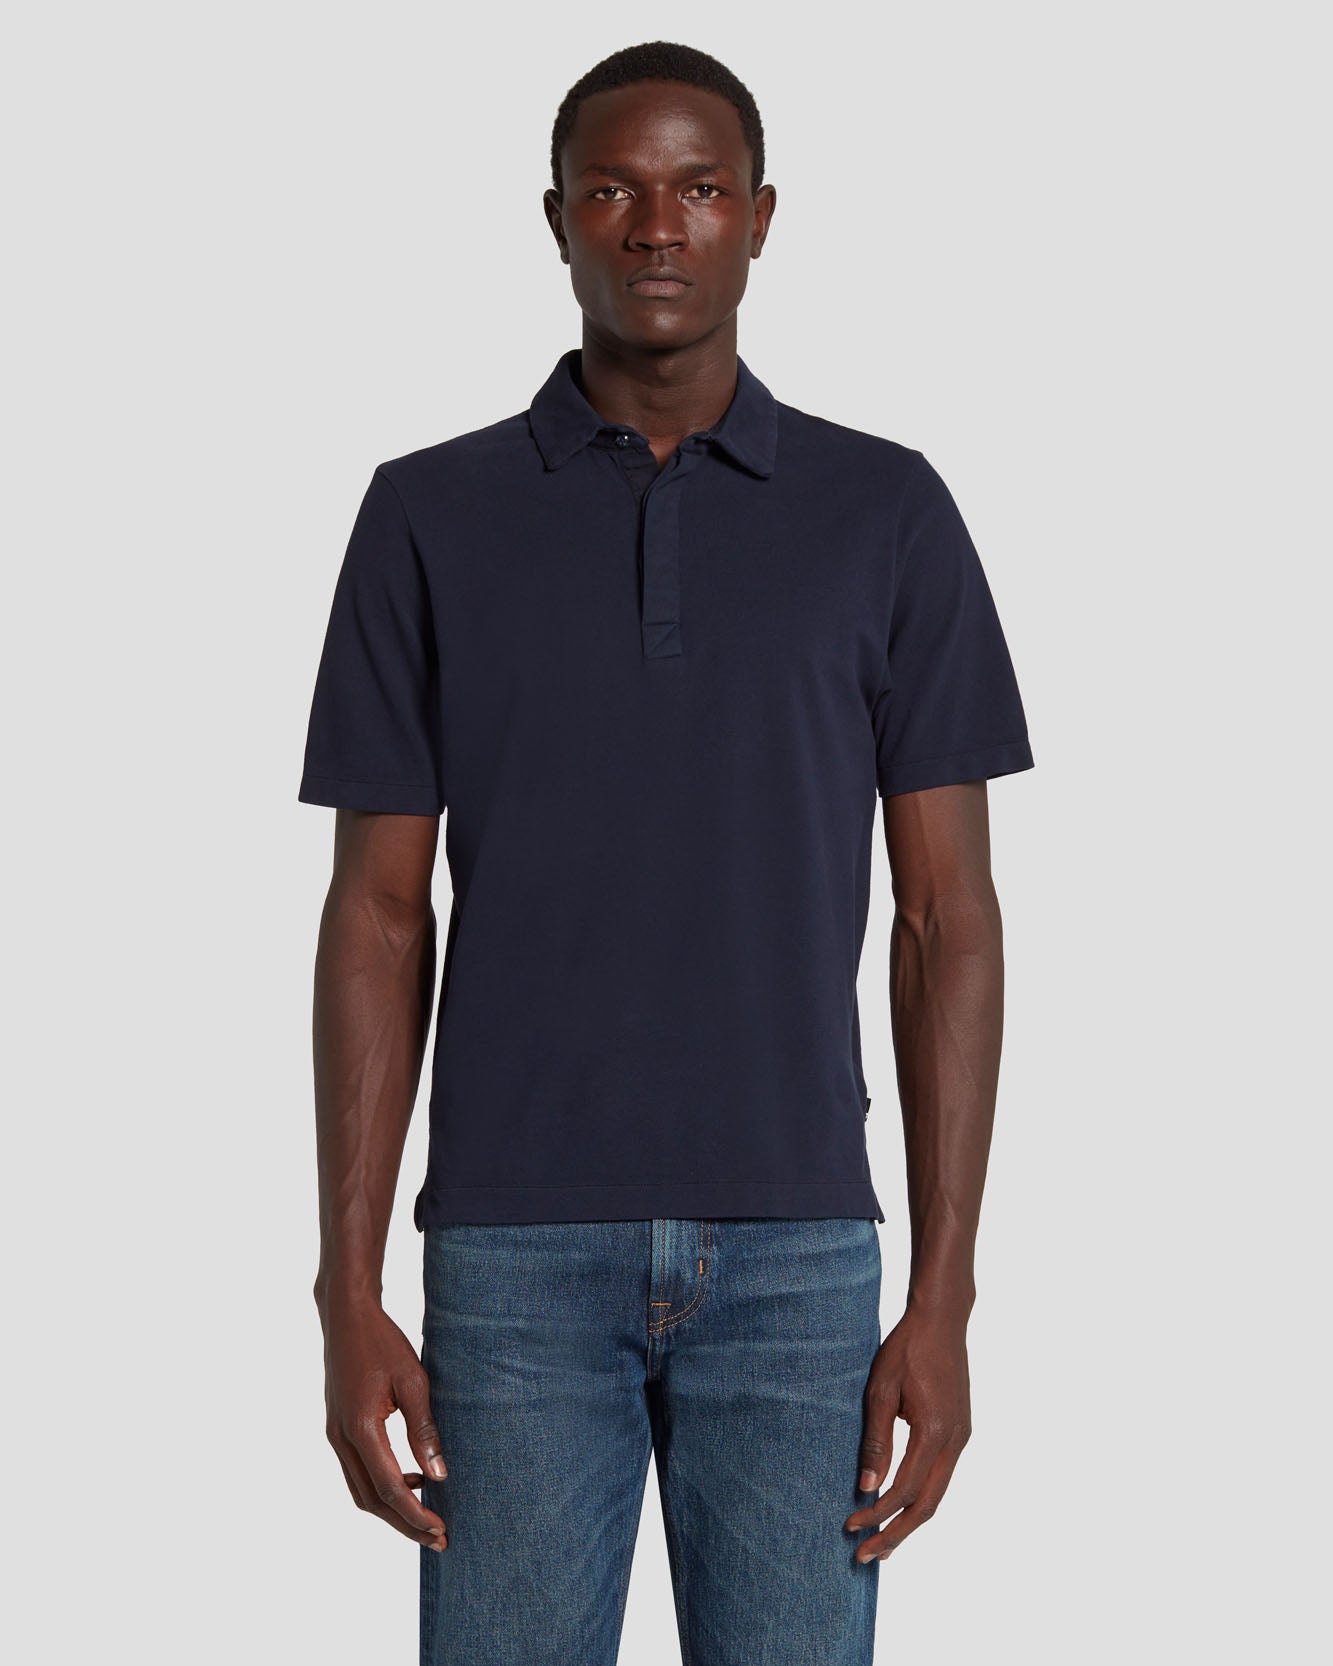 7 For All Mankind Pique Knit Polo in Navy 7MSMMM35NVY